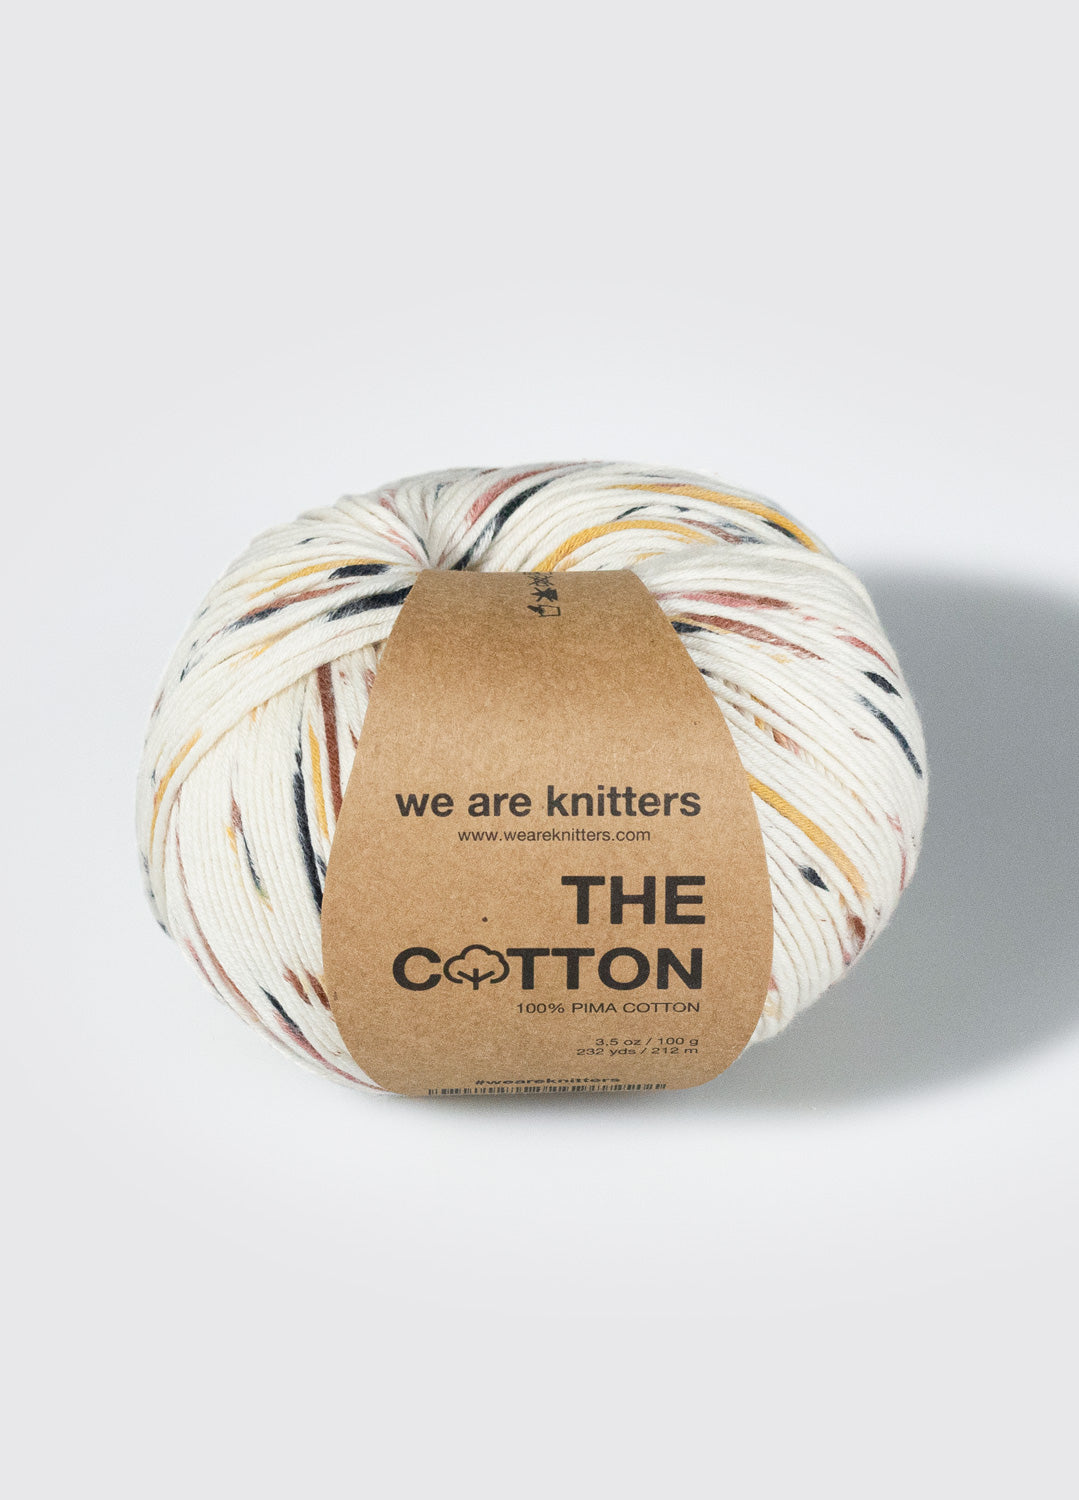 Baumwolle – knitters are We